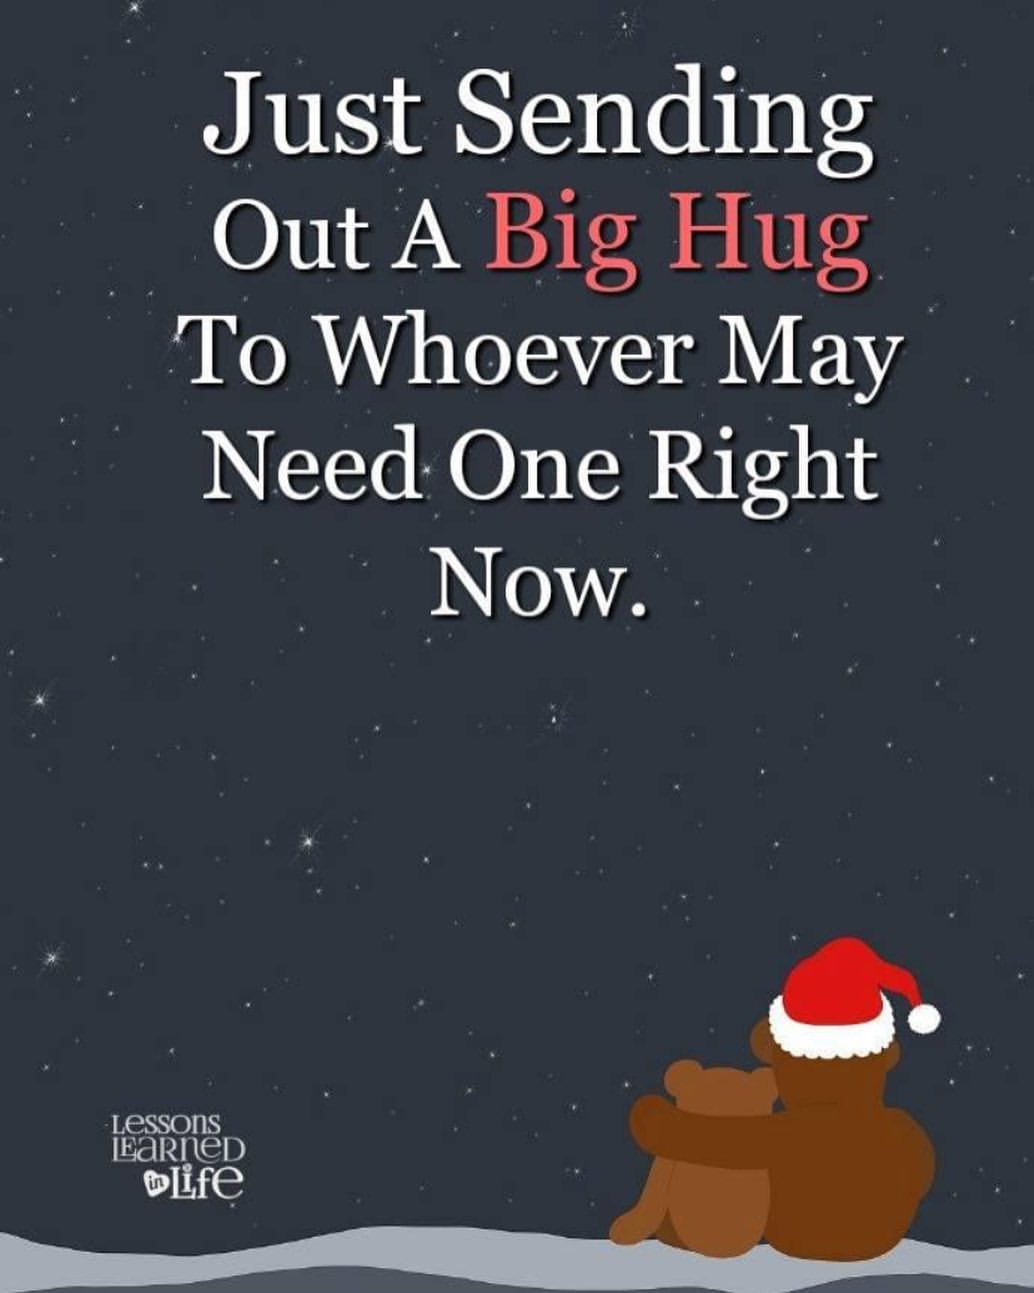 Just sending big hug out a to whoever may need one right now.